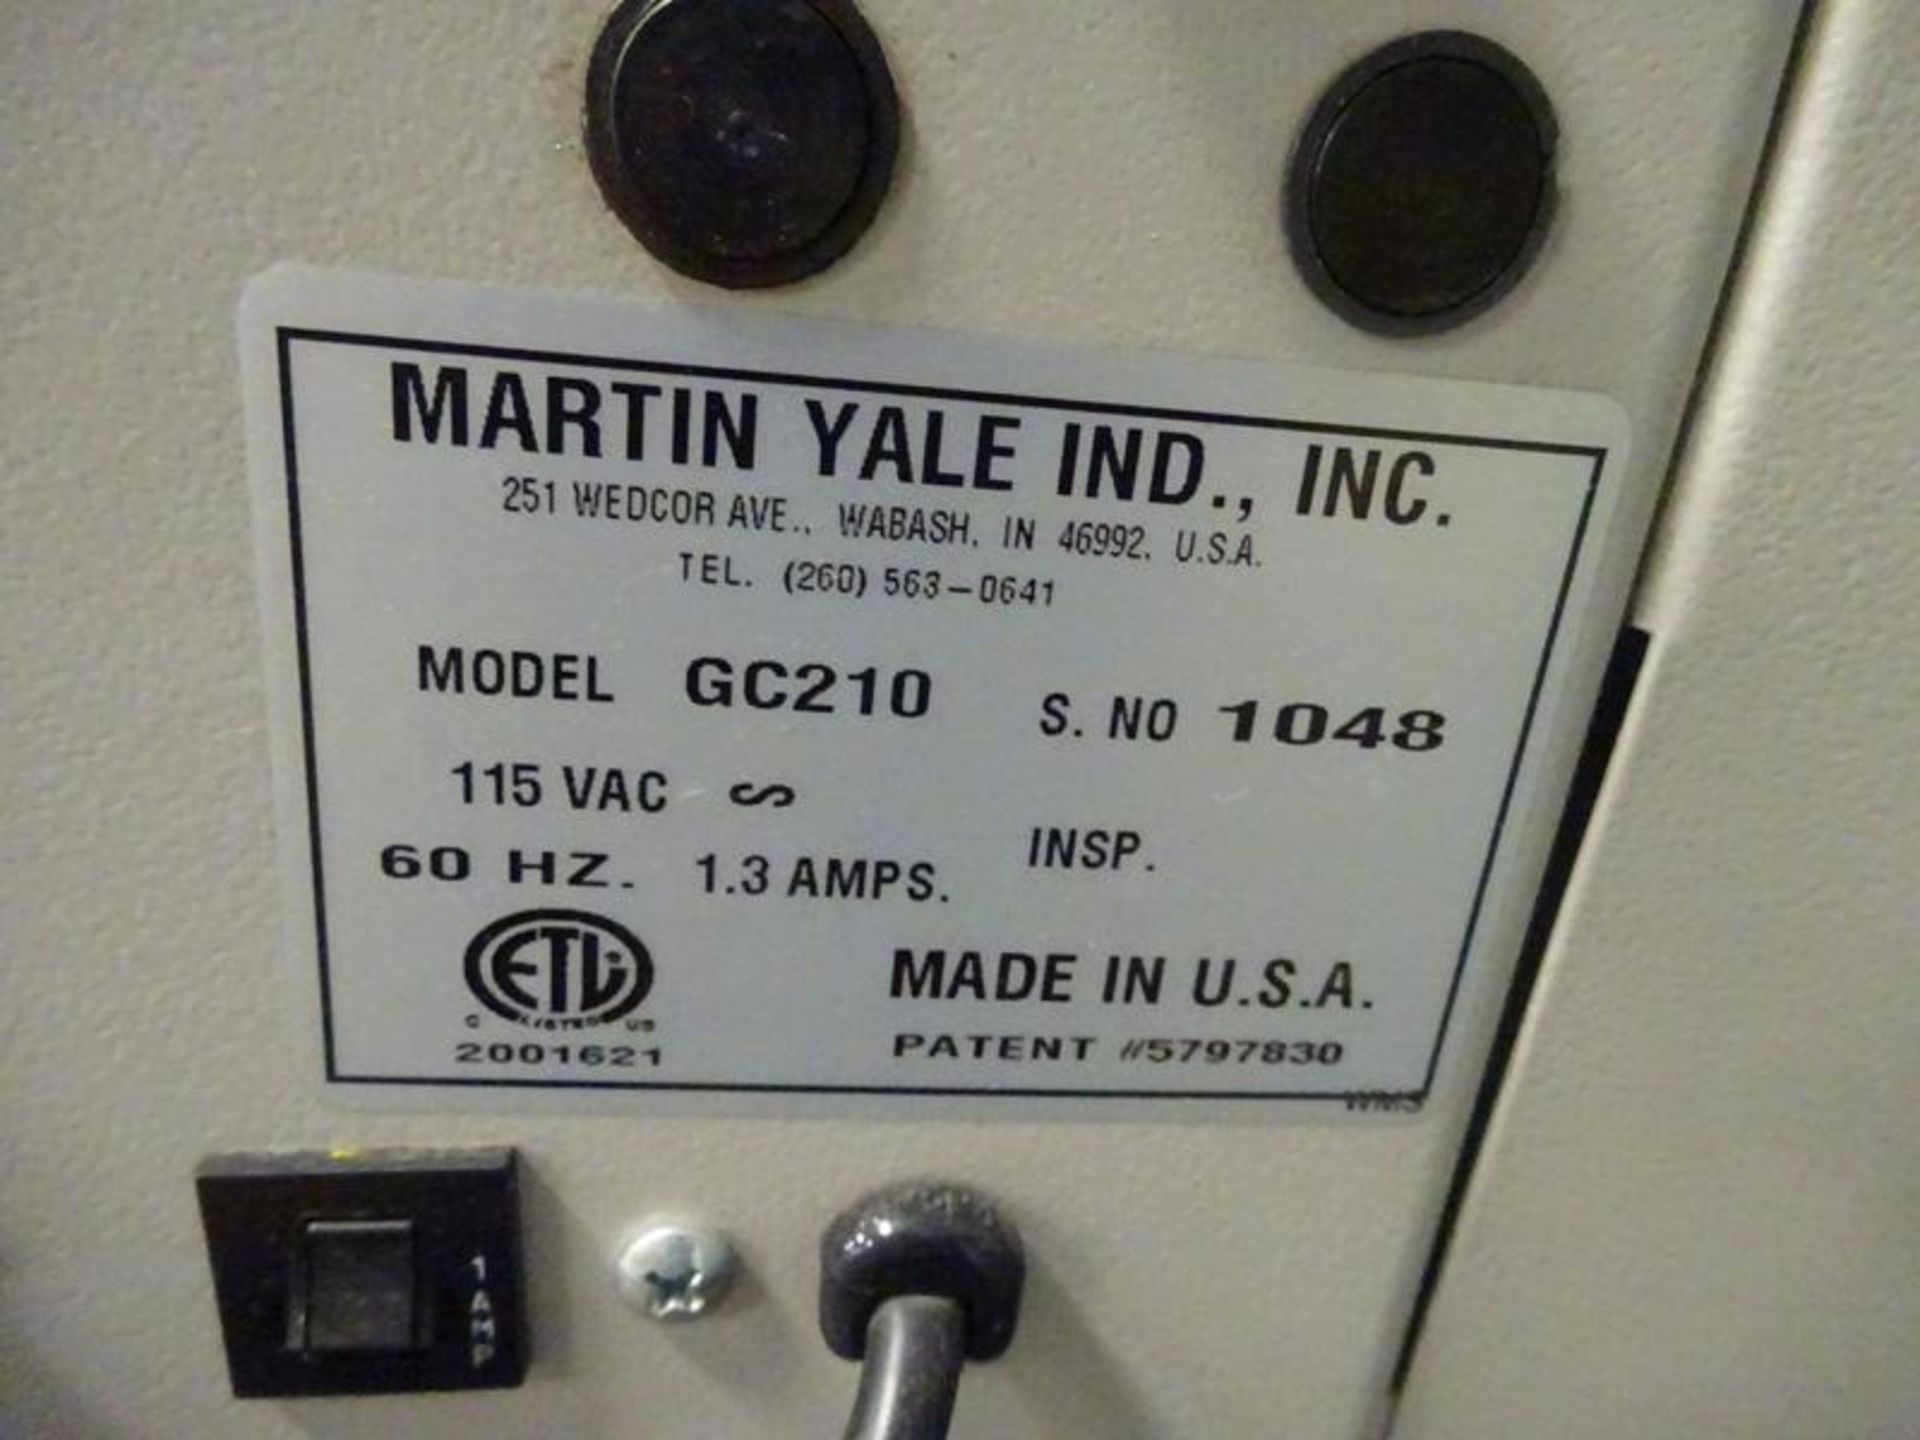 Martin Yale Md. GC210 Slitter, S/N 1048 - Image 3 of 3